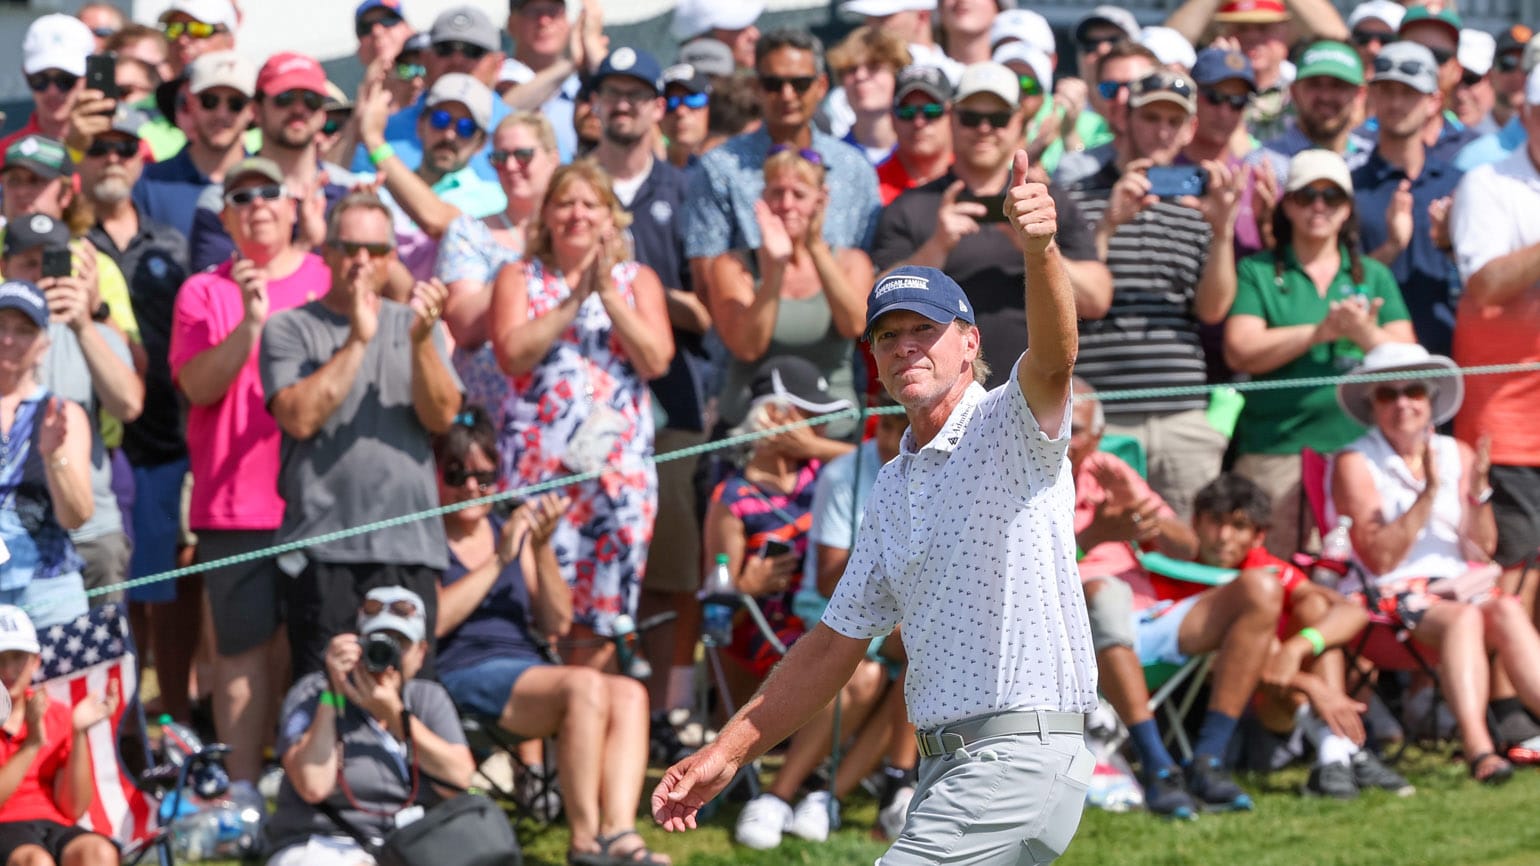 Wisconsin's own Steve Stricker made a late run on Sunday but came up two strokes short of a third consecutive senior major in 2023. (USGA/Jeff Haynes)